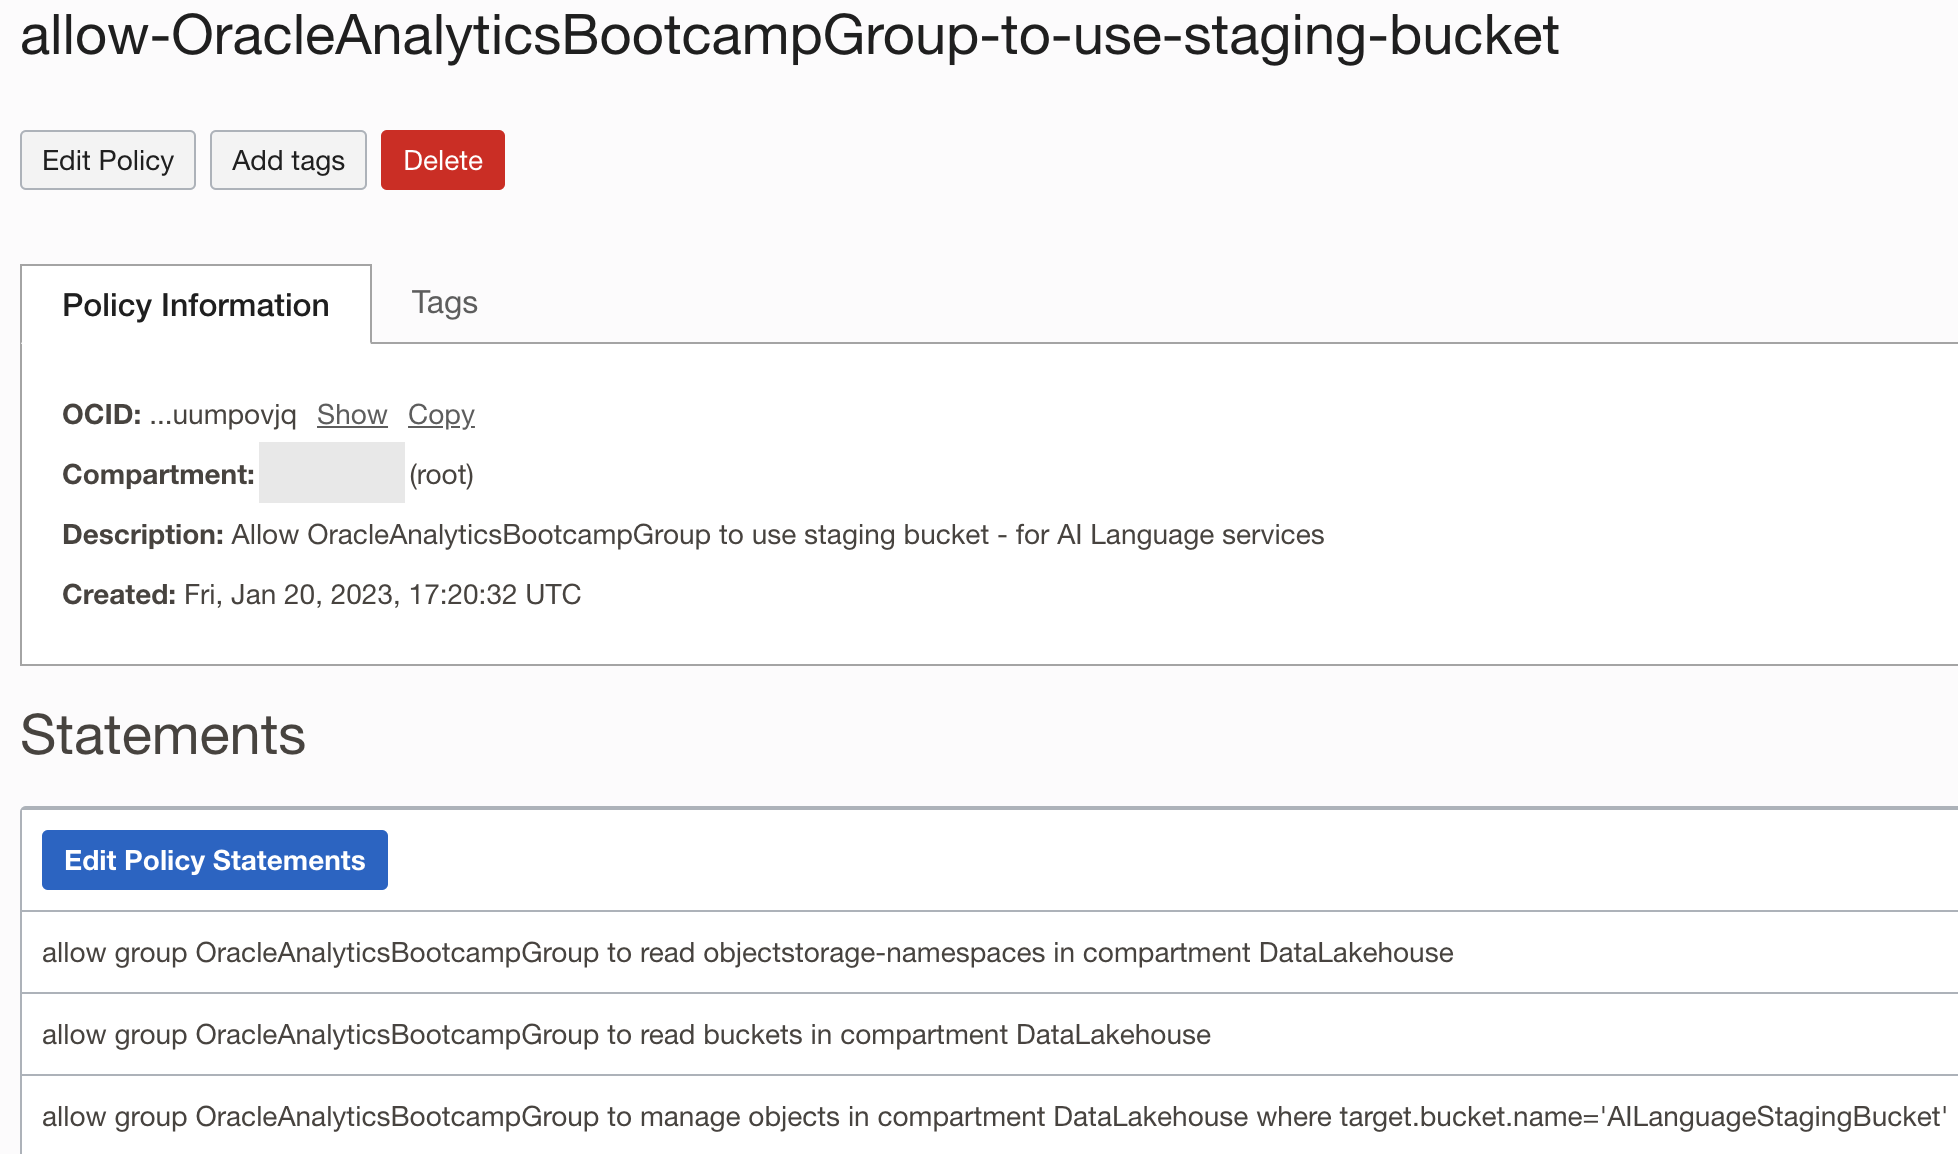 Policy to allow user group to use and manage staging bucket